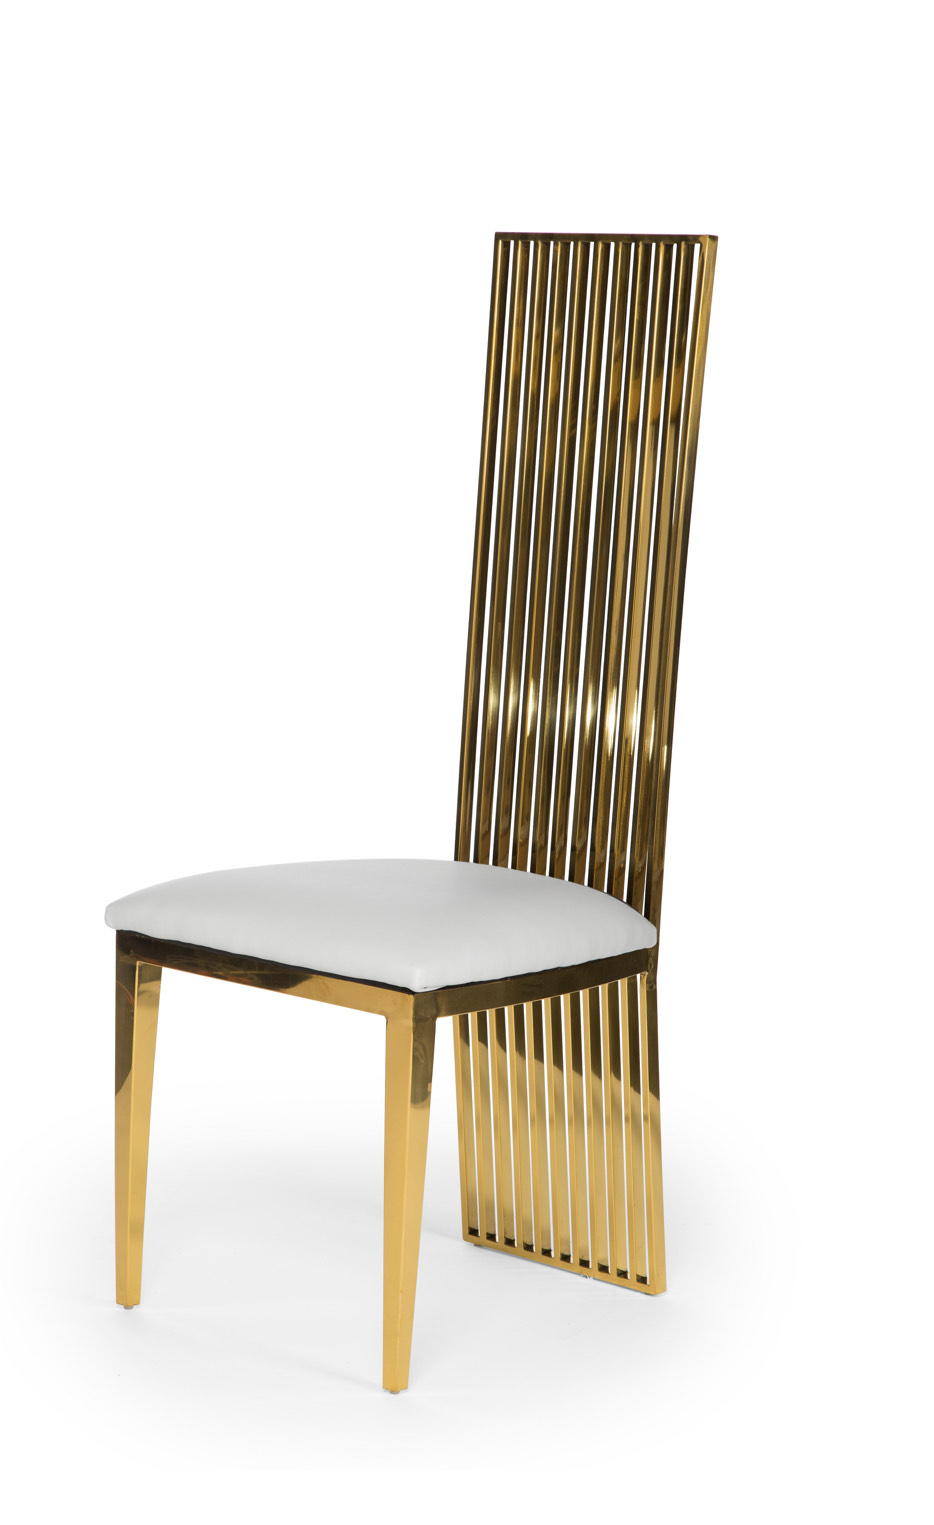 Gold and white chair